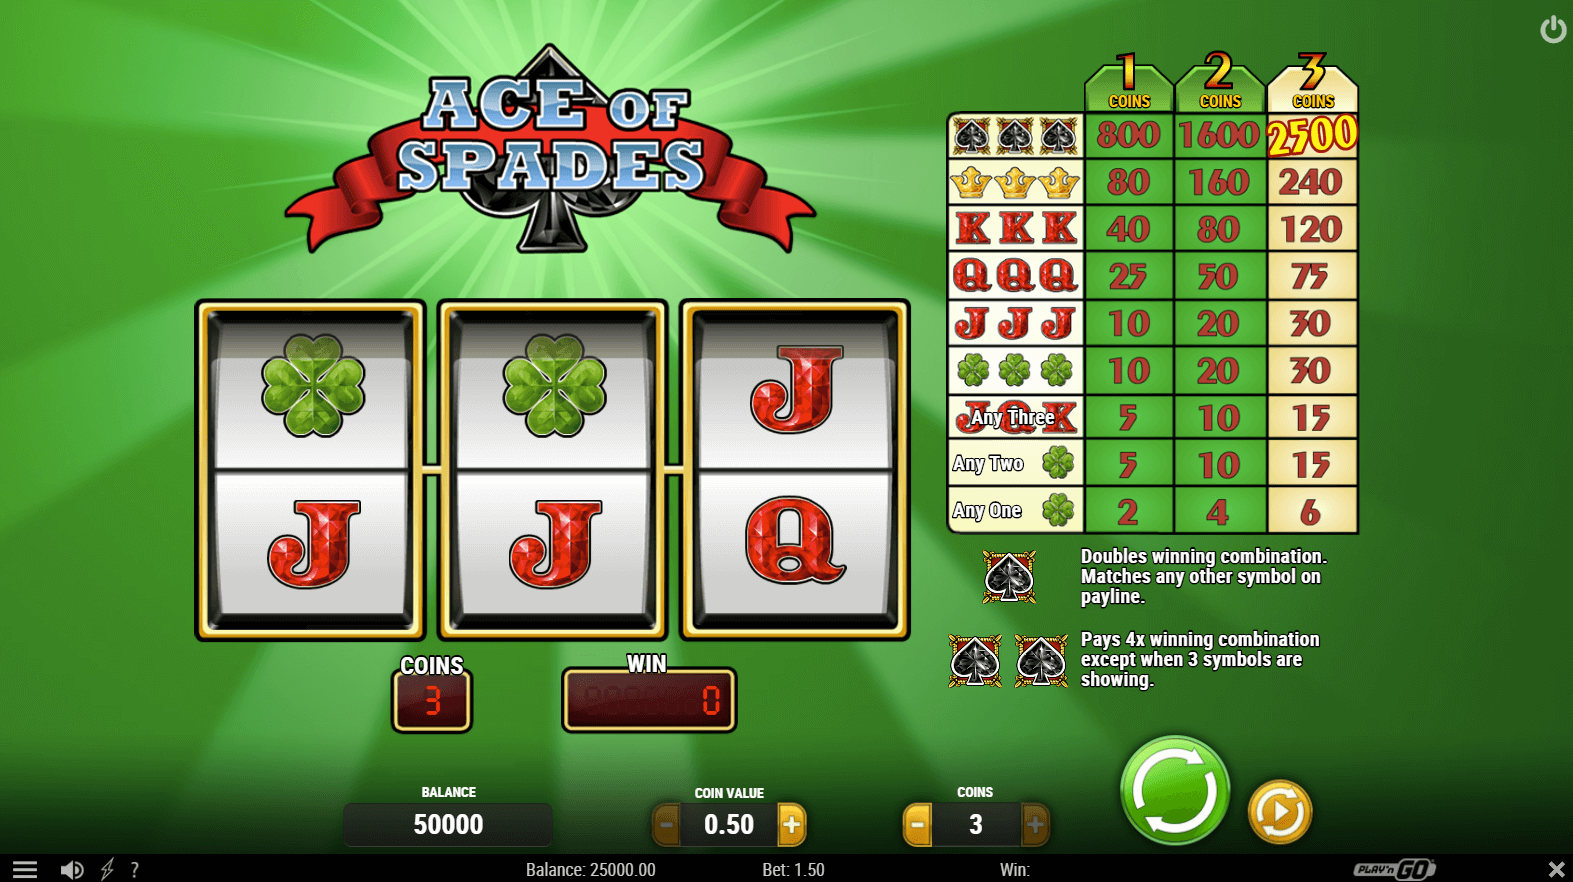 Ace of Spades Slot Game | 50 Free Spins | PlayOJO